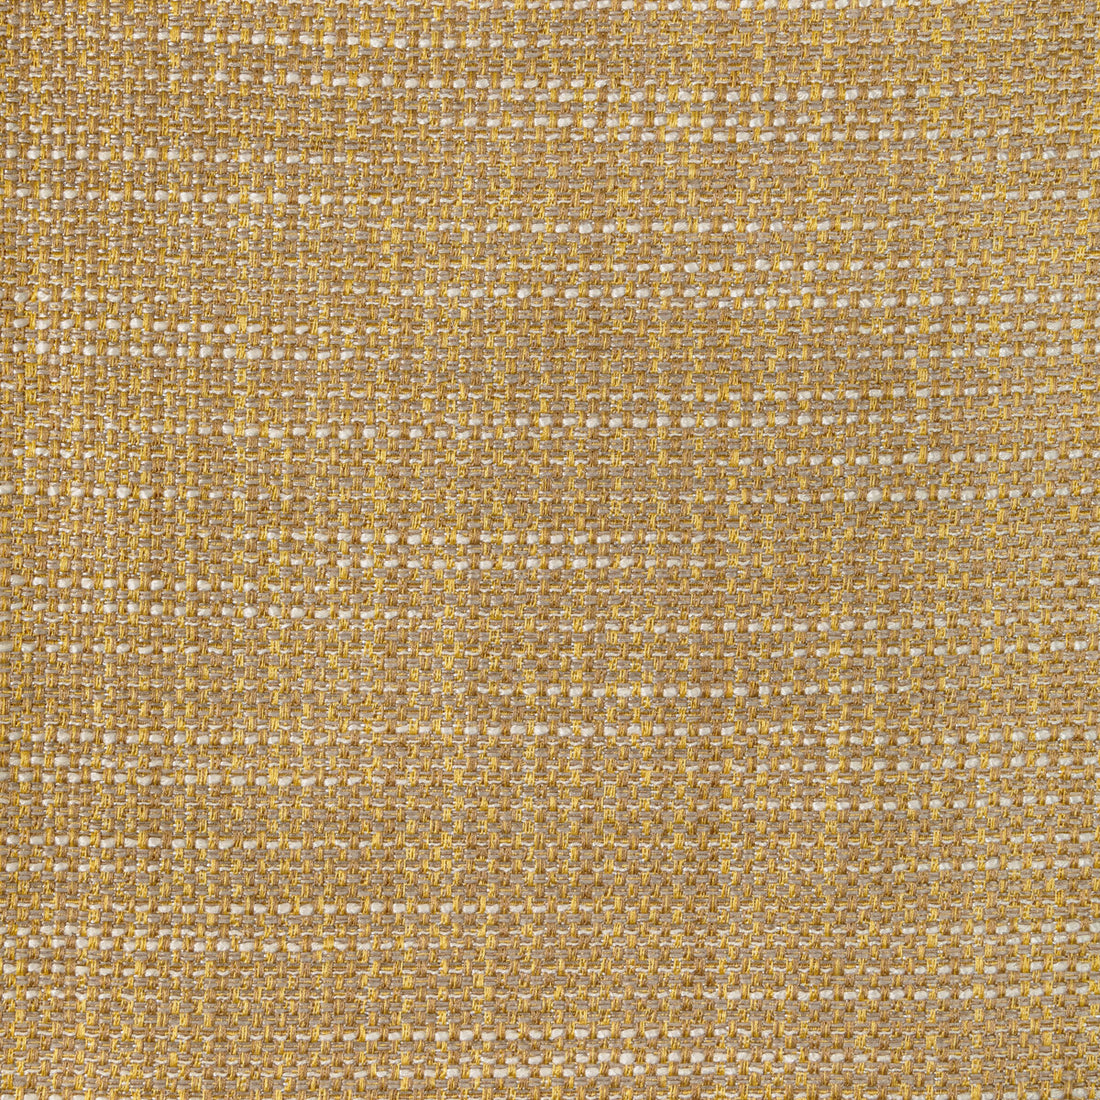 Luma Texture fabric in butterscotch color - pattern 4947.411.0 - by Kravet Contract in the Fr Window Luma Texture collection